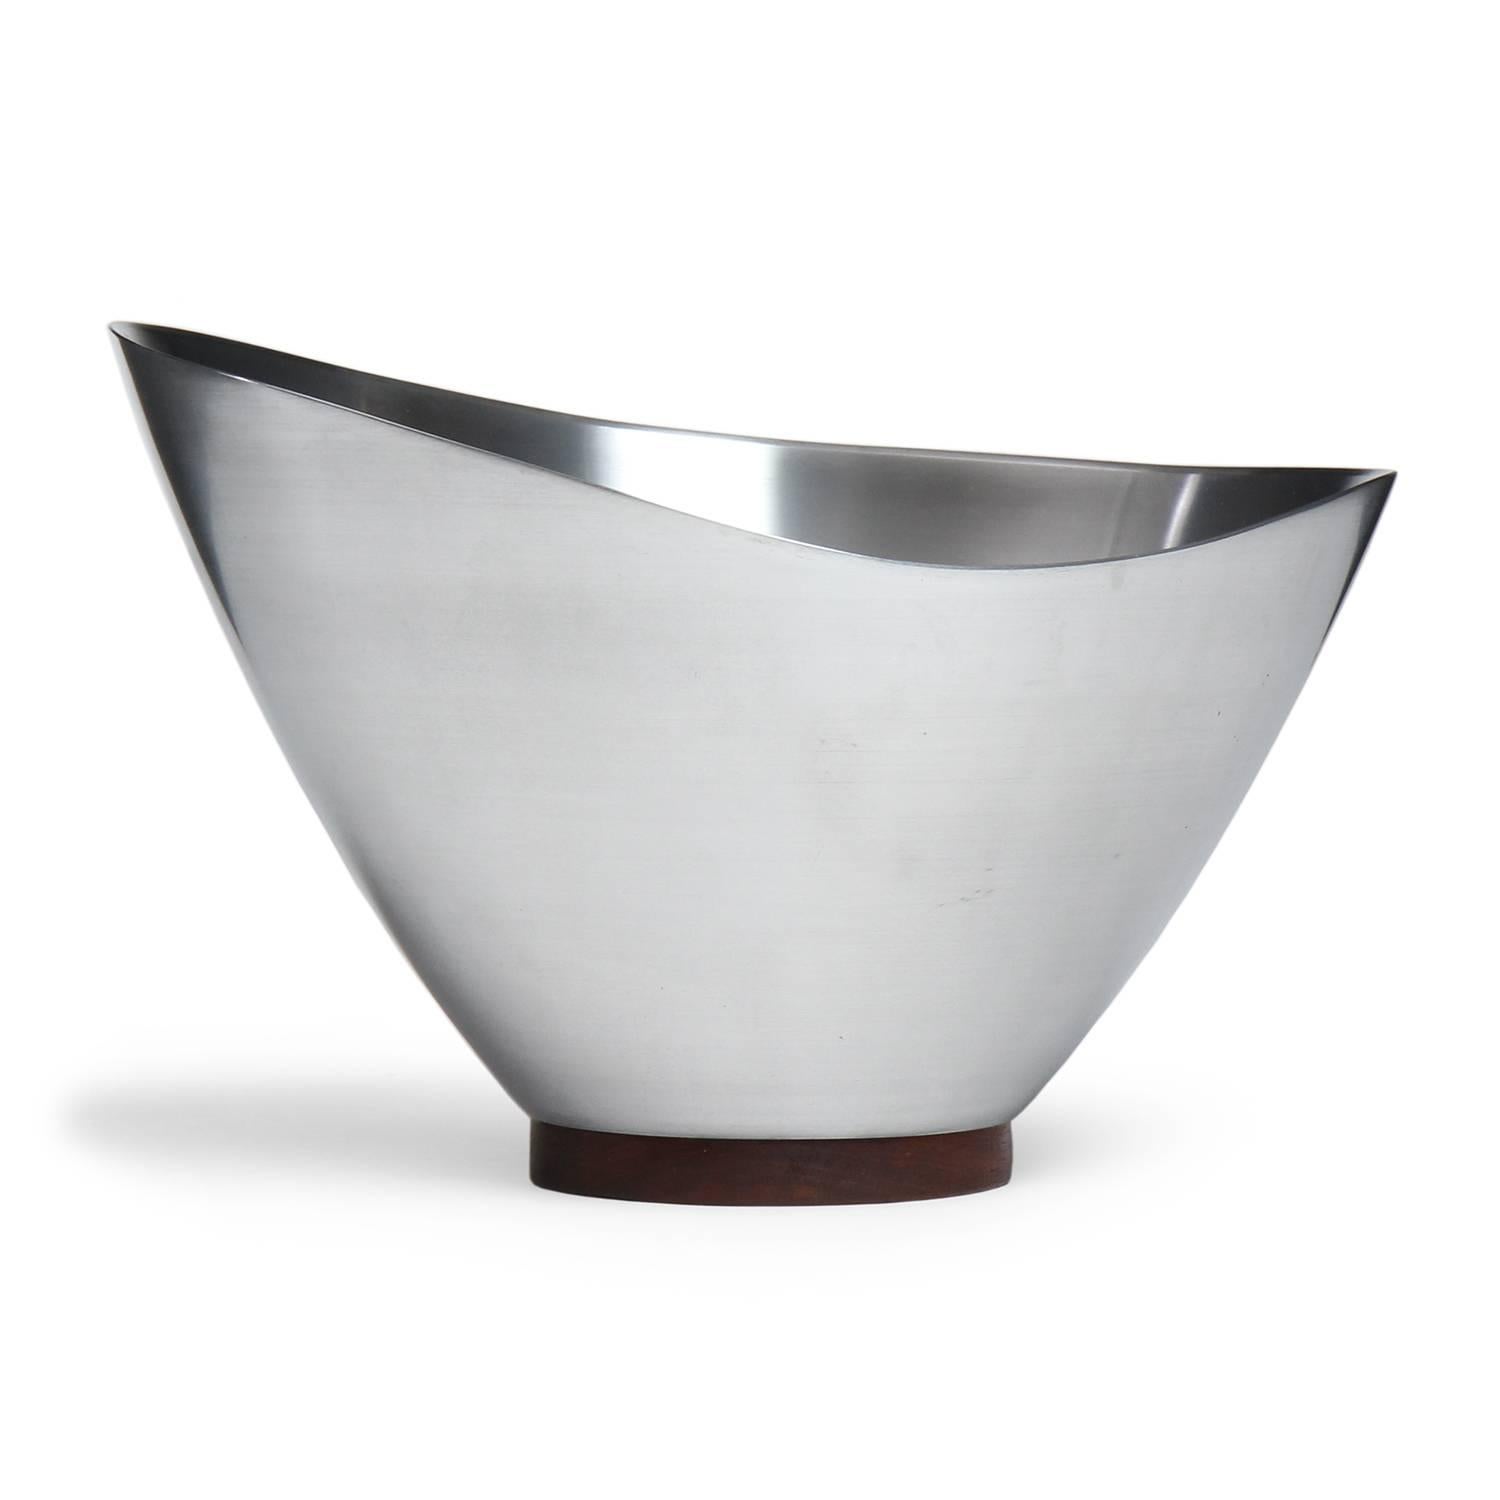 Mid-20th Century Spun Steel Footed Bowl